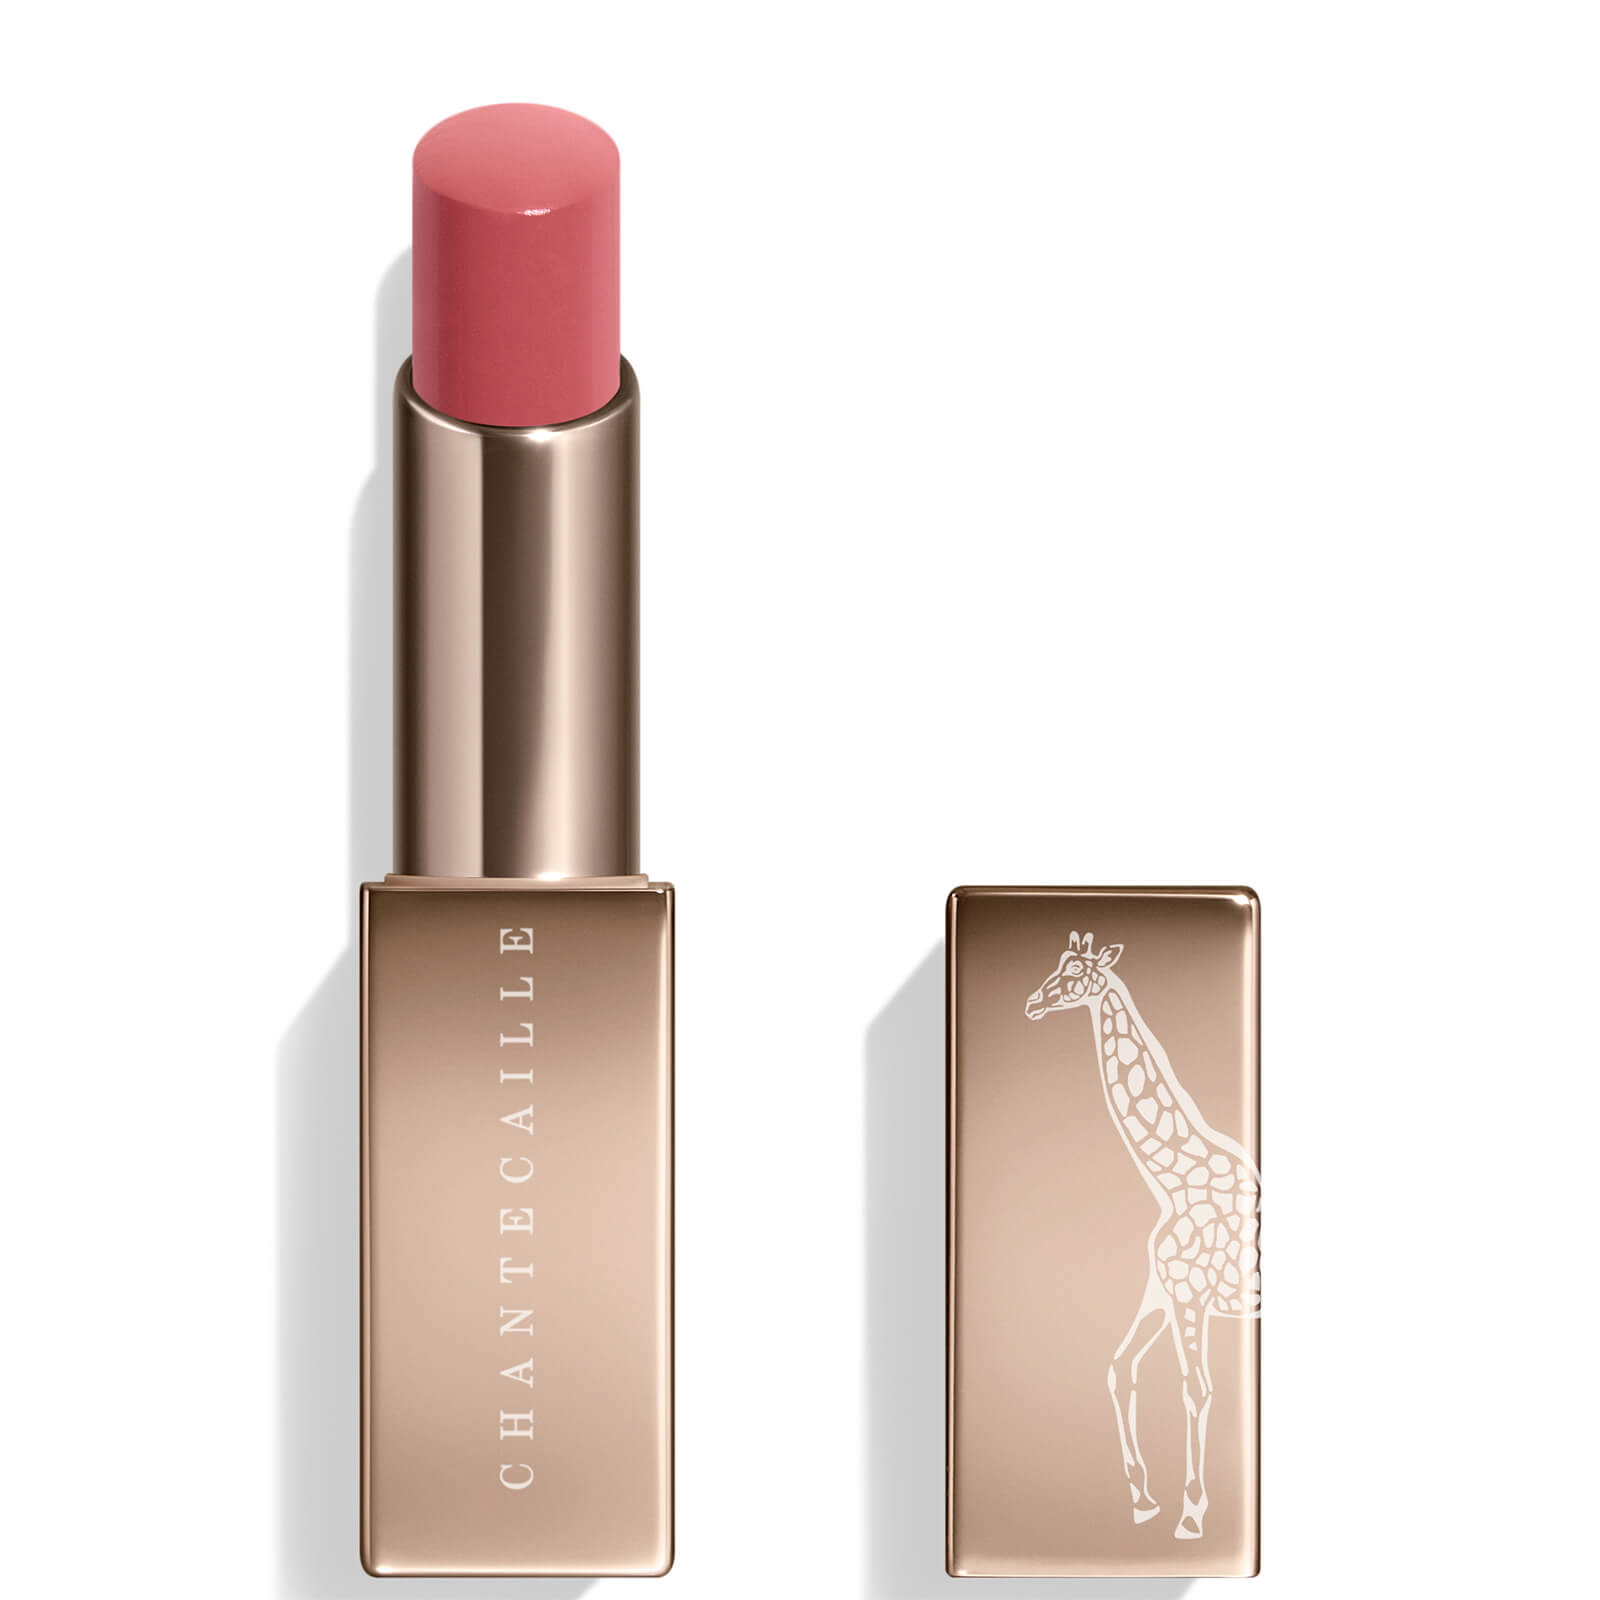 Chantecaille Lip Chic 3g (Various Shades) - Willow